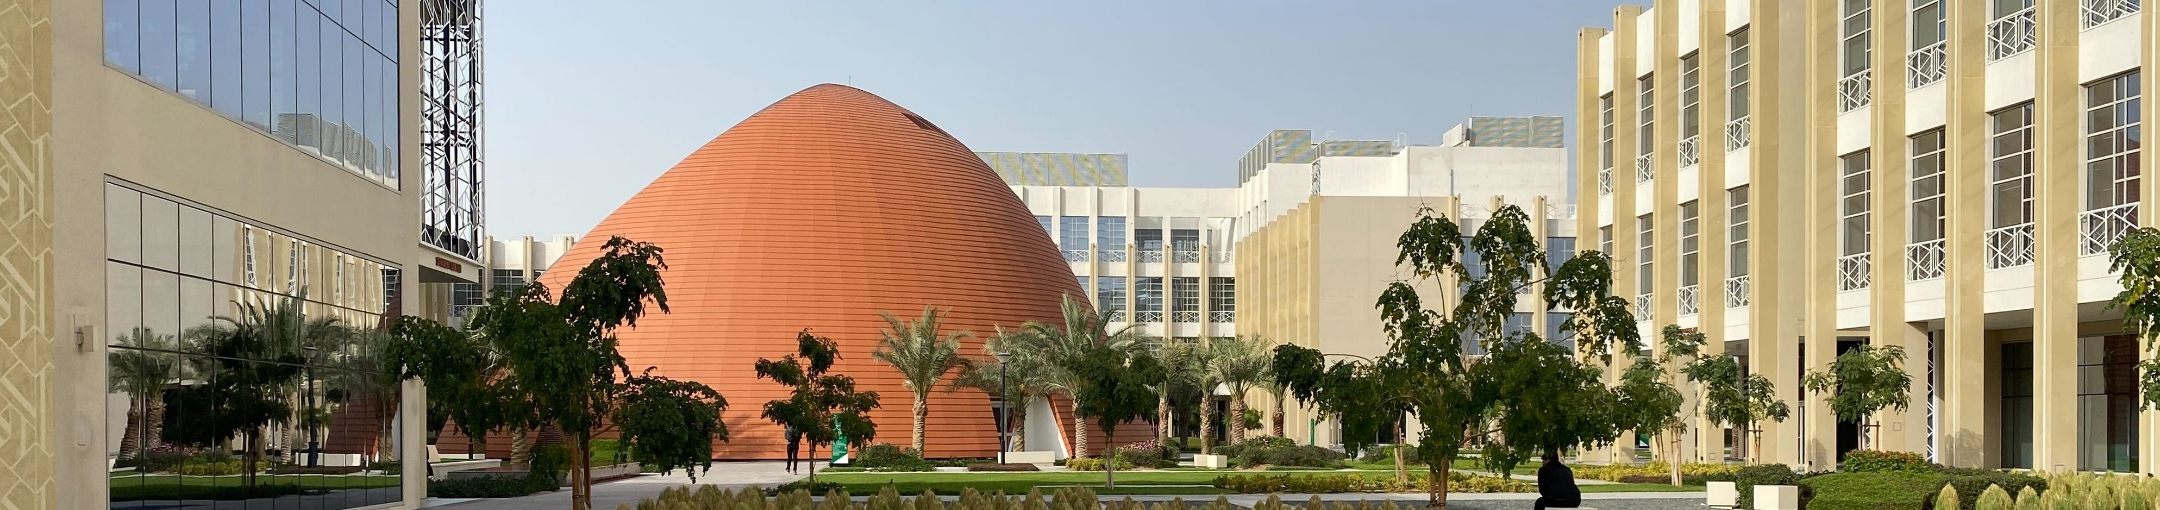 Campus with a brown, round building in the middle